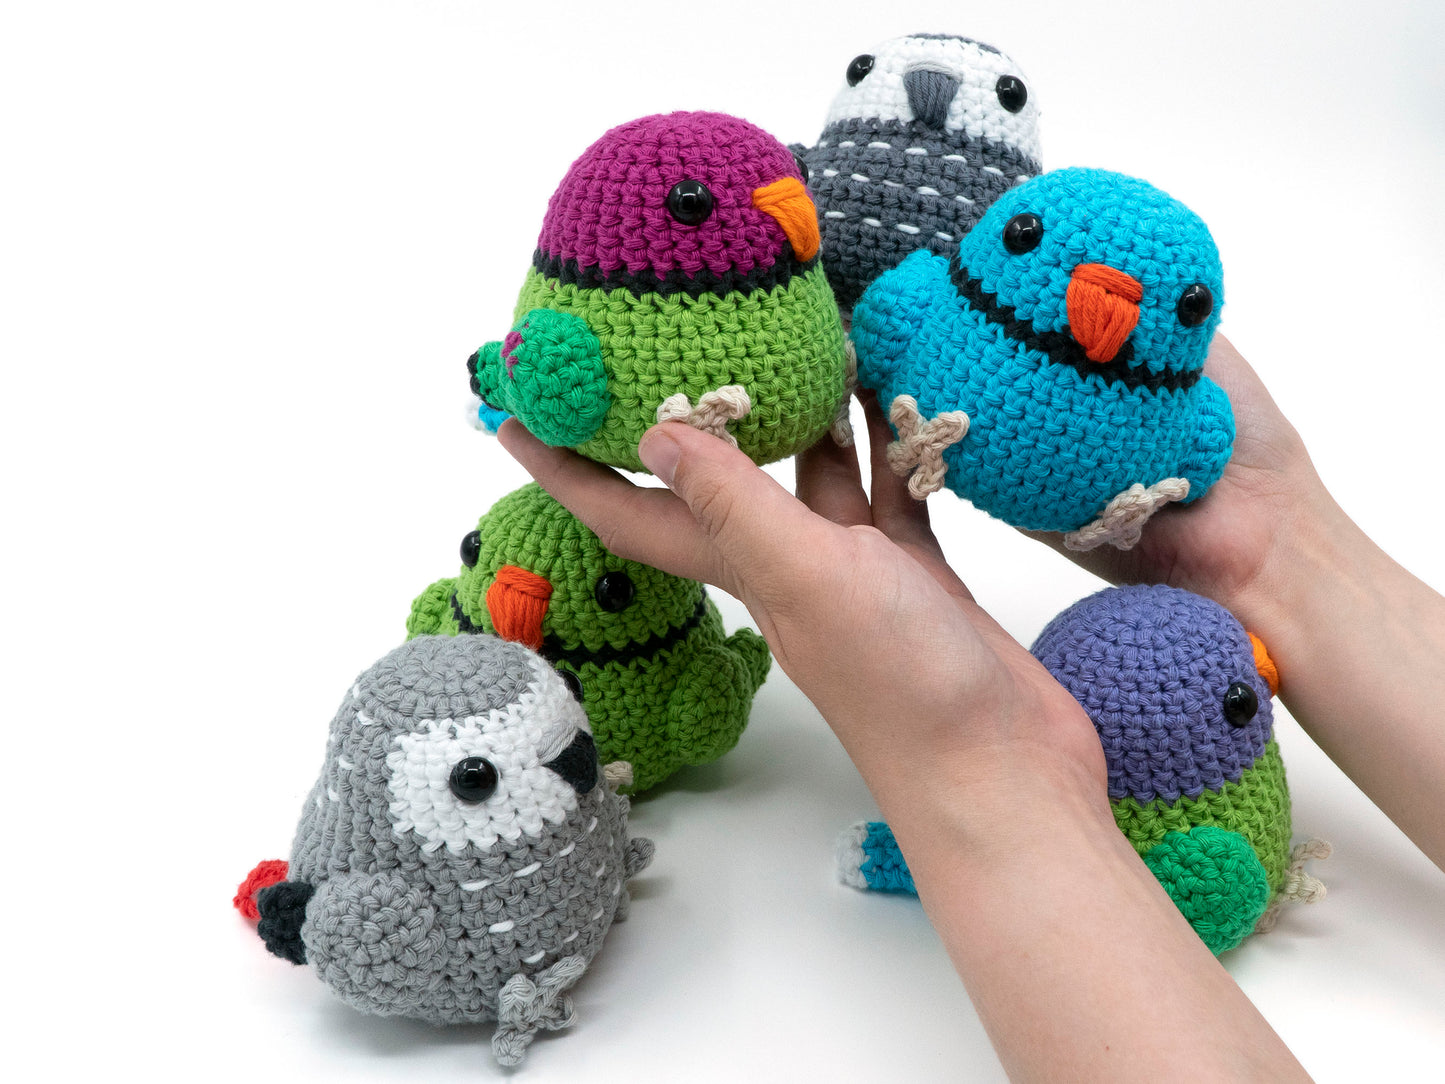 amigurumi crochet parrot pattern bundle with african grey plum-headed parakeet and indian ringneck being held together